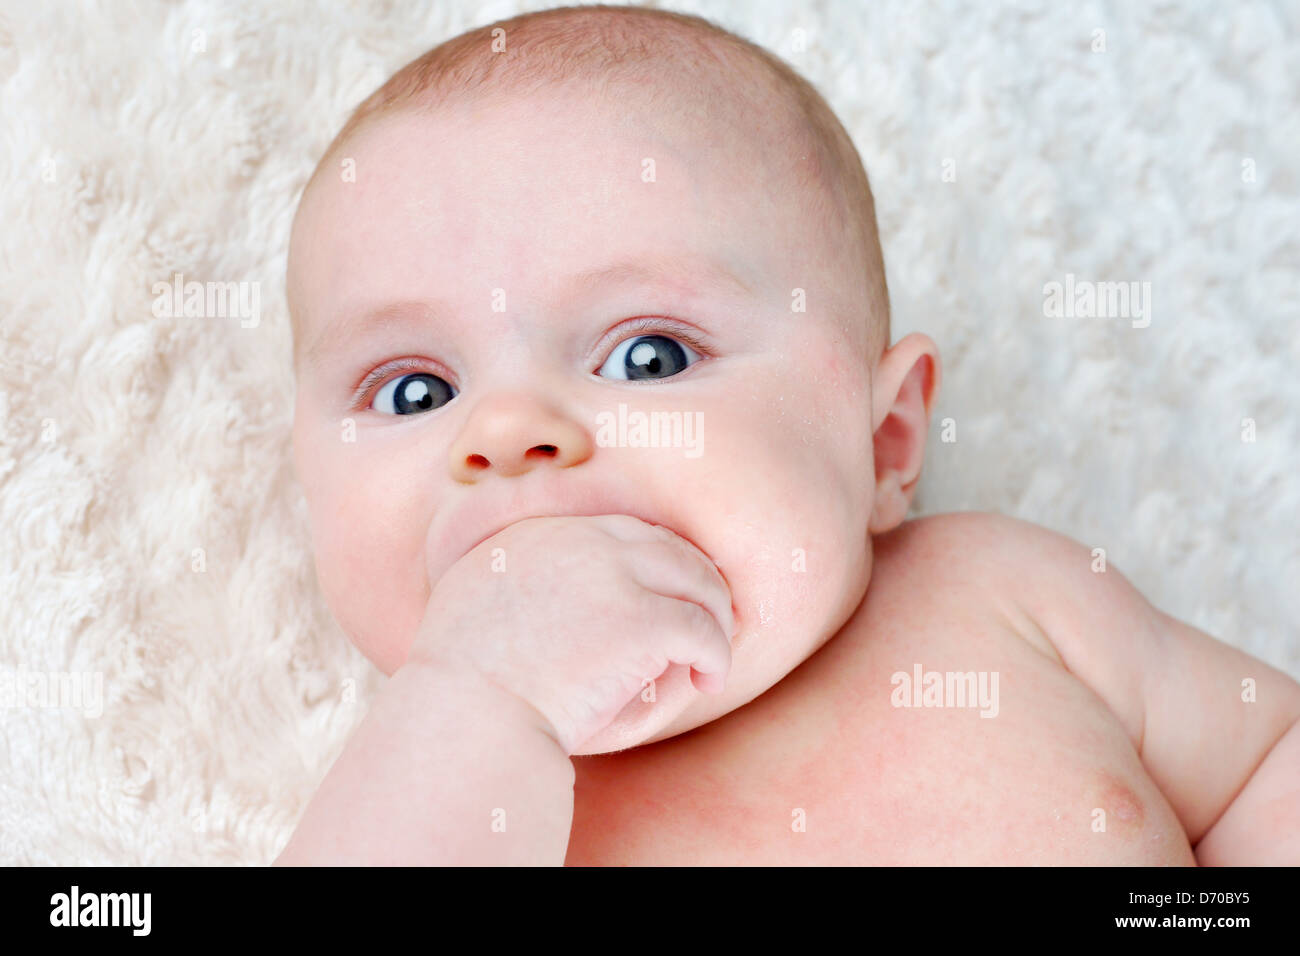 Portrait of beautiful 3 months old baby teething and sucking on its hand to sooth itself Stock Photo